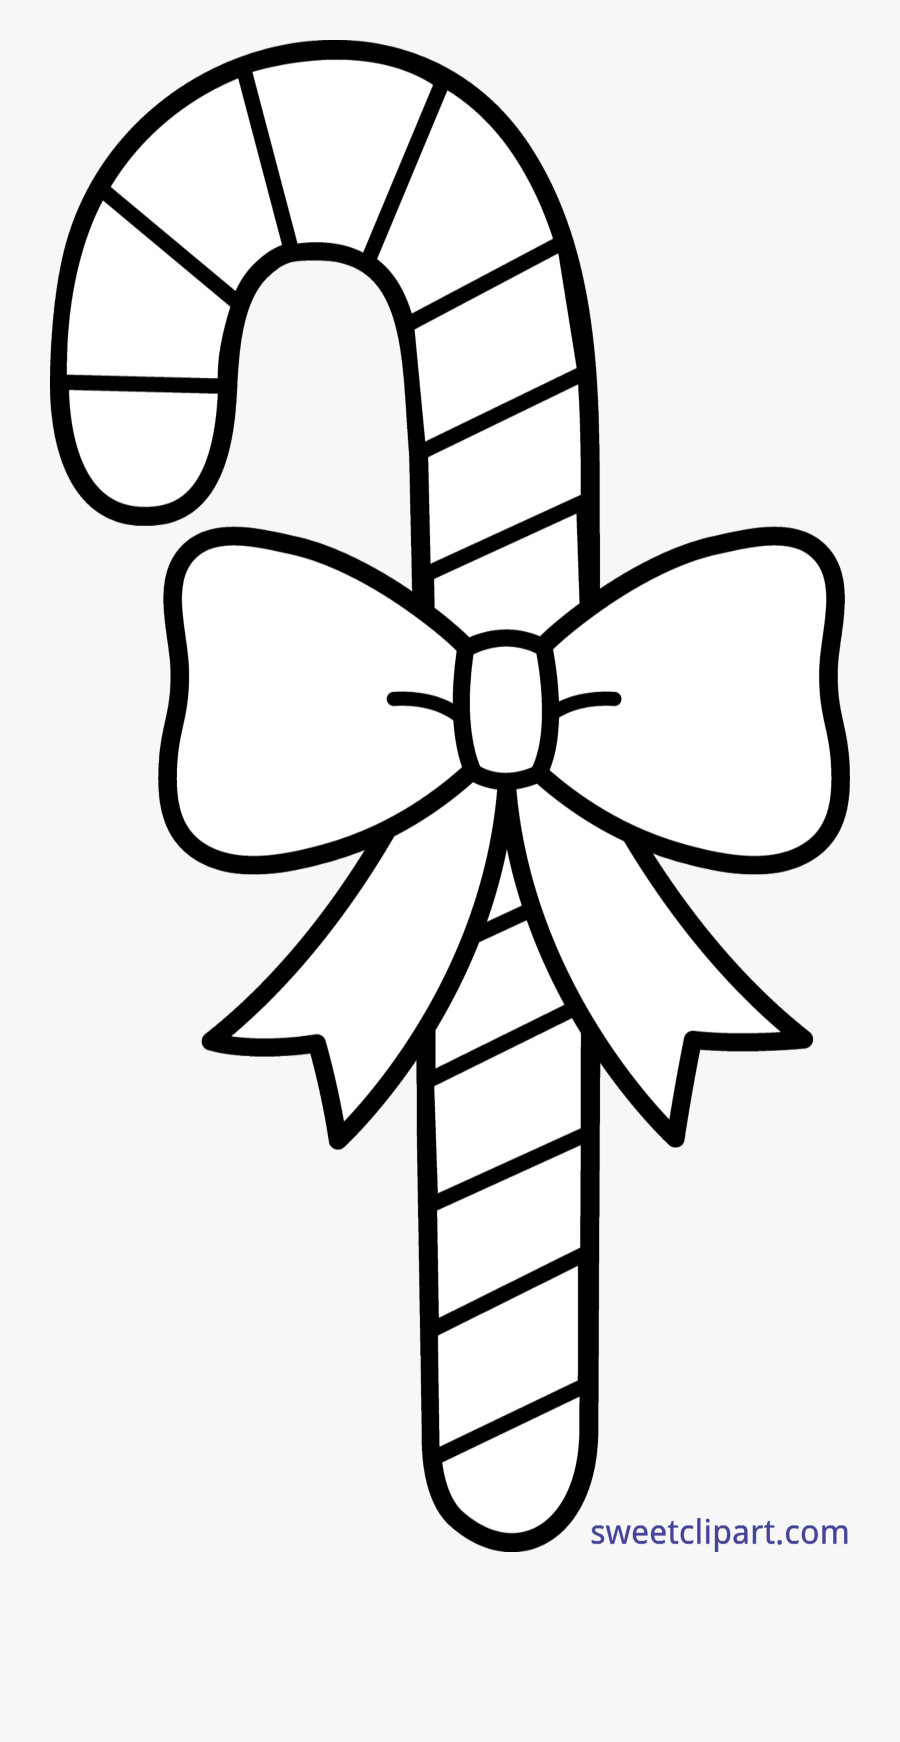 Clip Art Candy Cane Black And White Clipart - Ribbon Clipart Black And White, Transparent Clipart